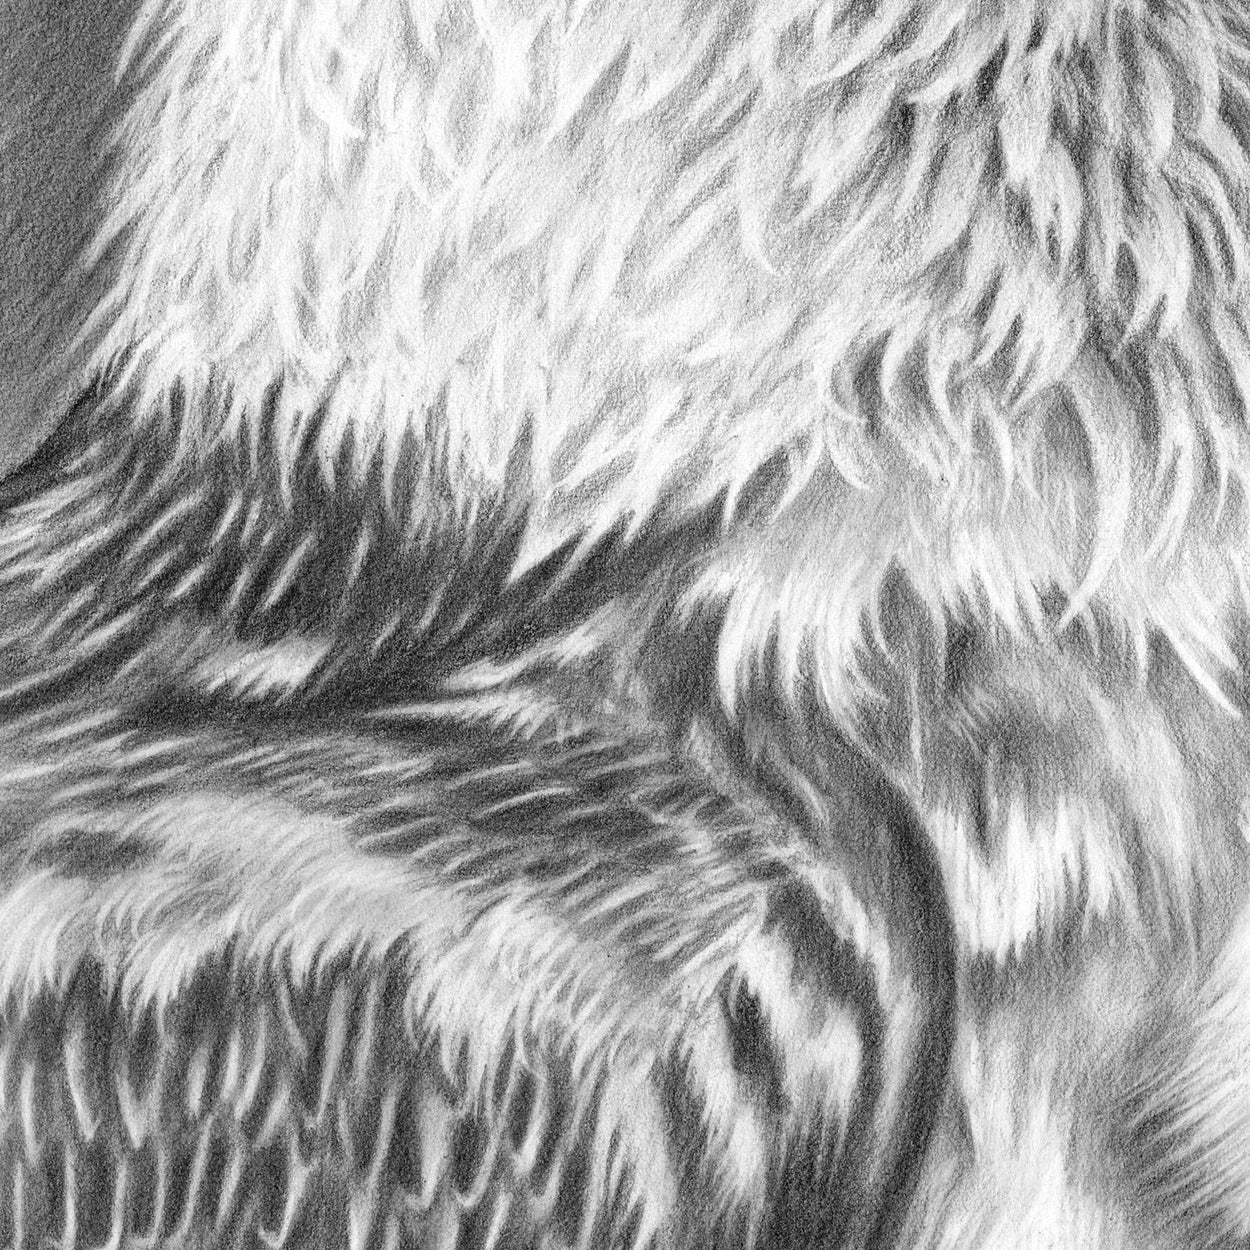 Close-up of a black and white drawing of vulture feathers